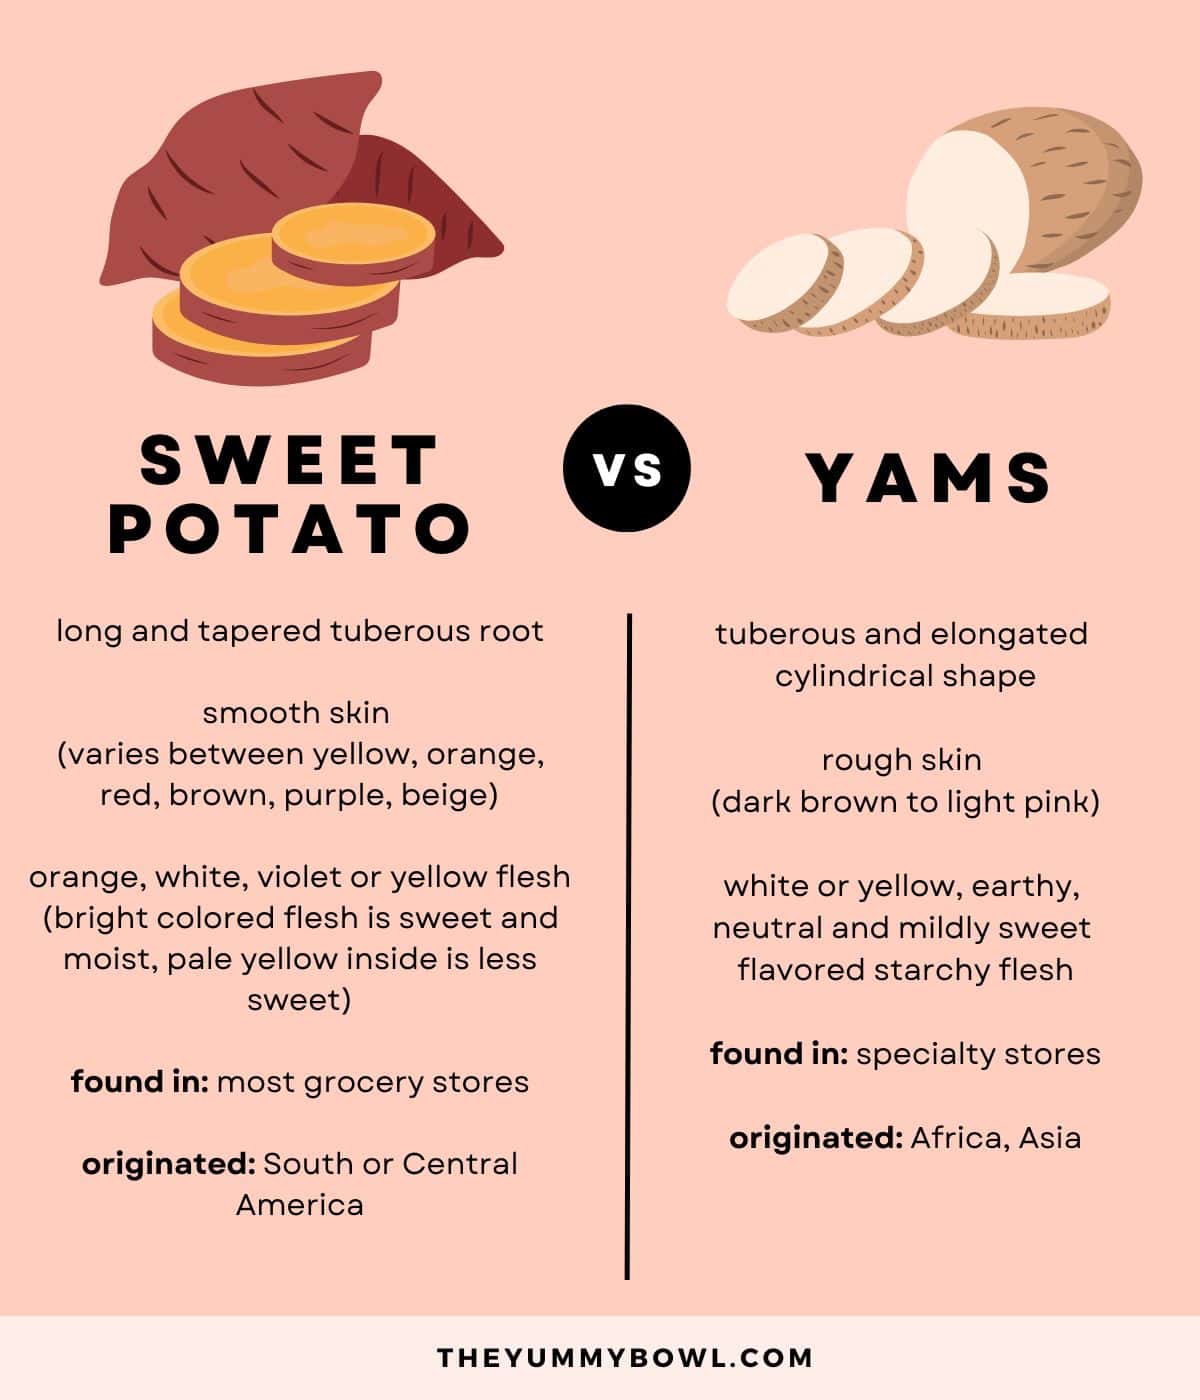 infographic about the differences between sweet potato and yams.